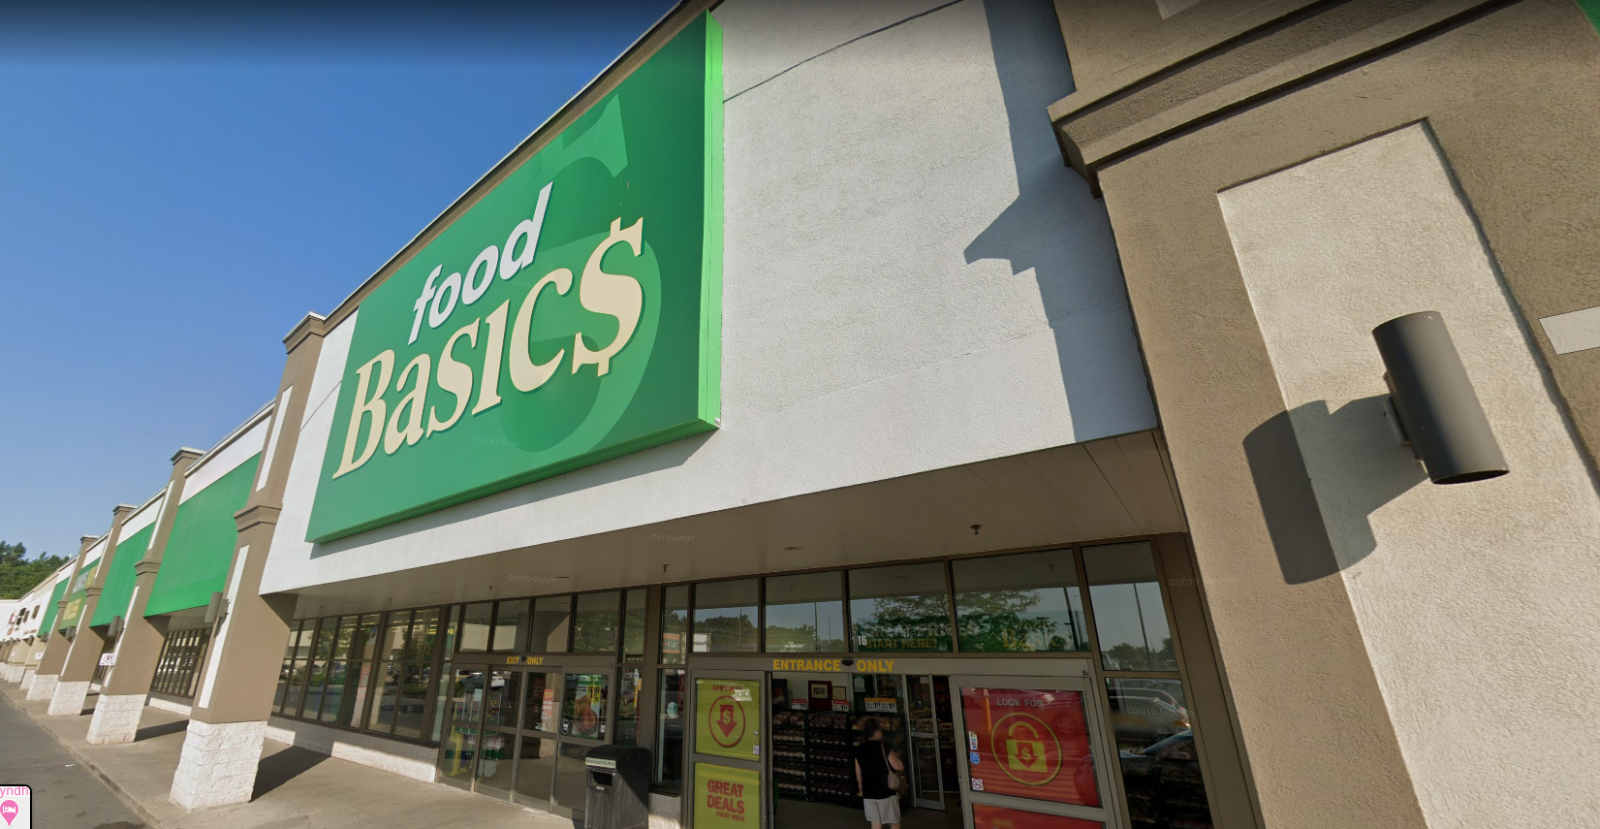 Cornwall Food Basics employee tests positive for COVID-19